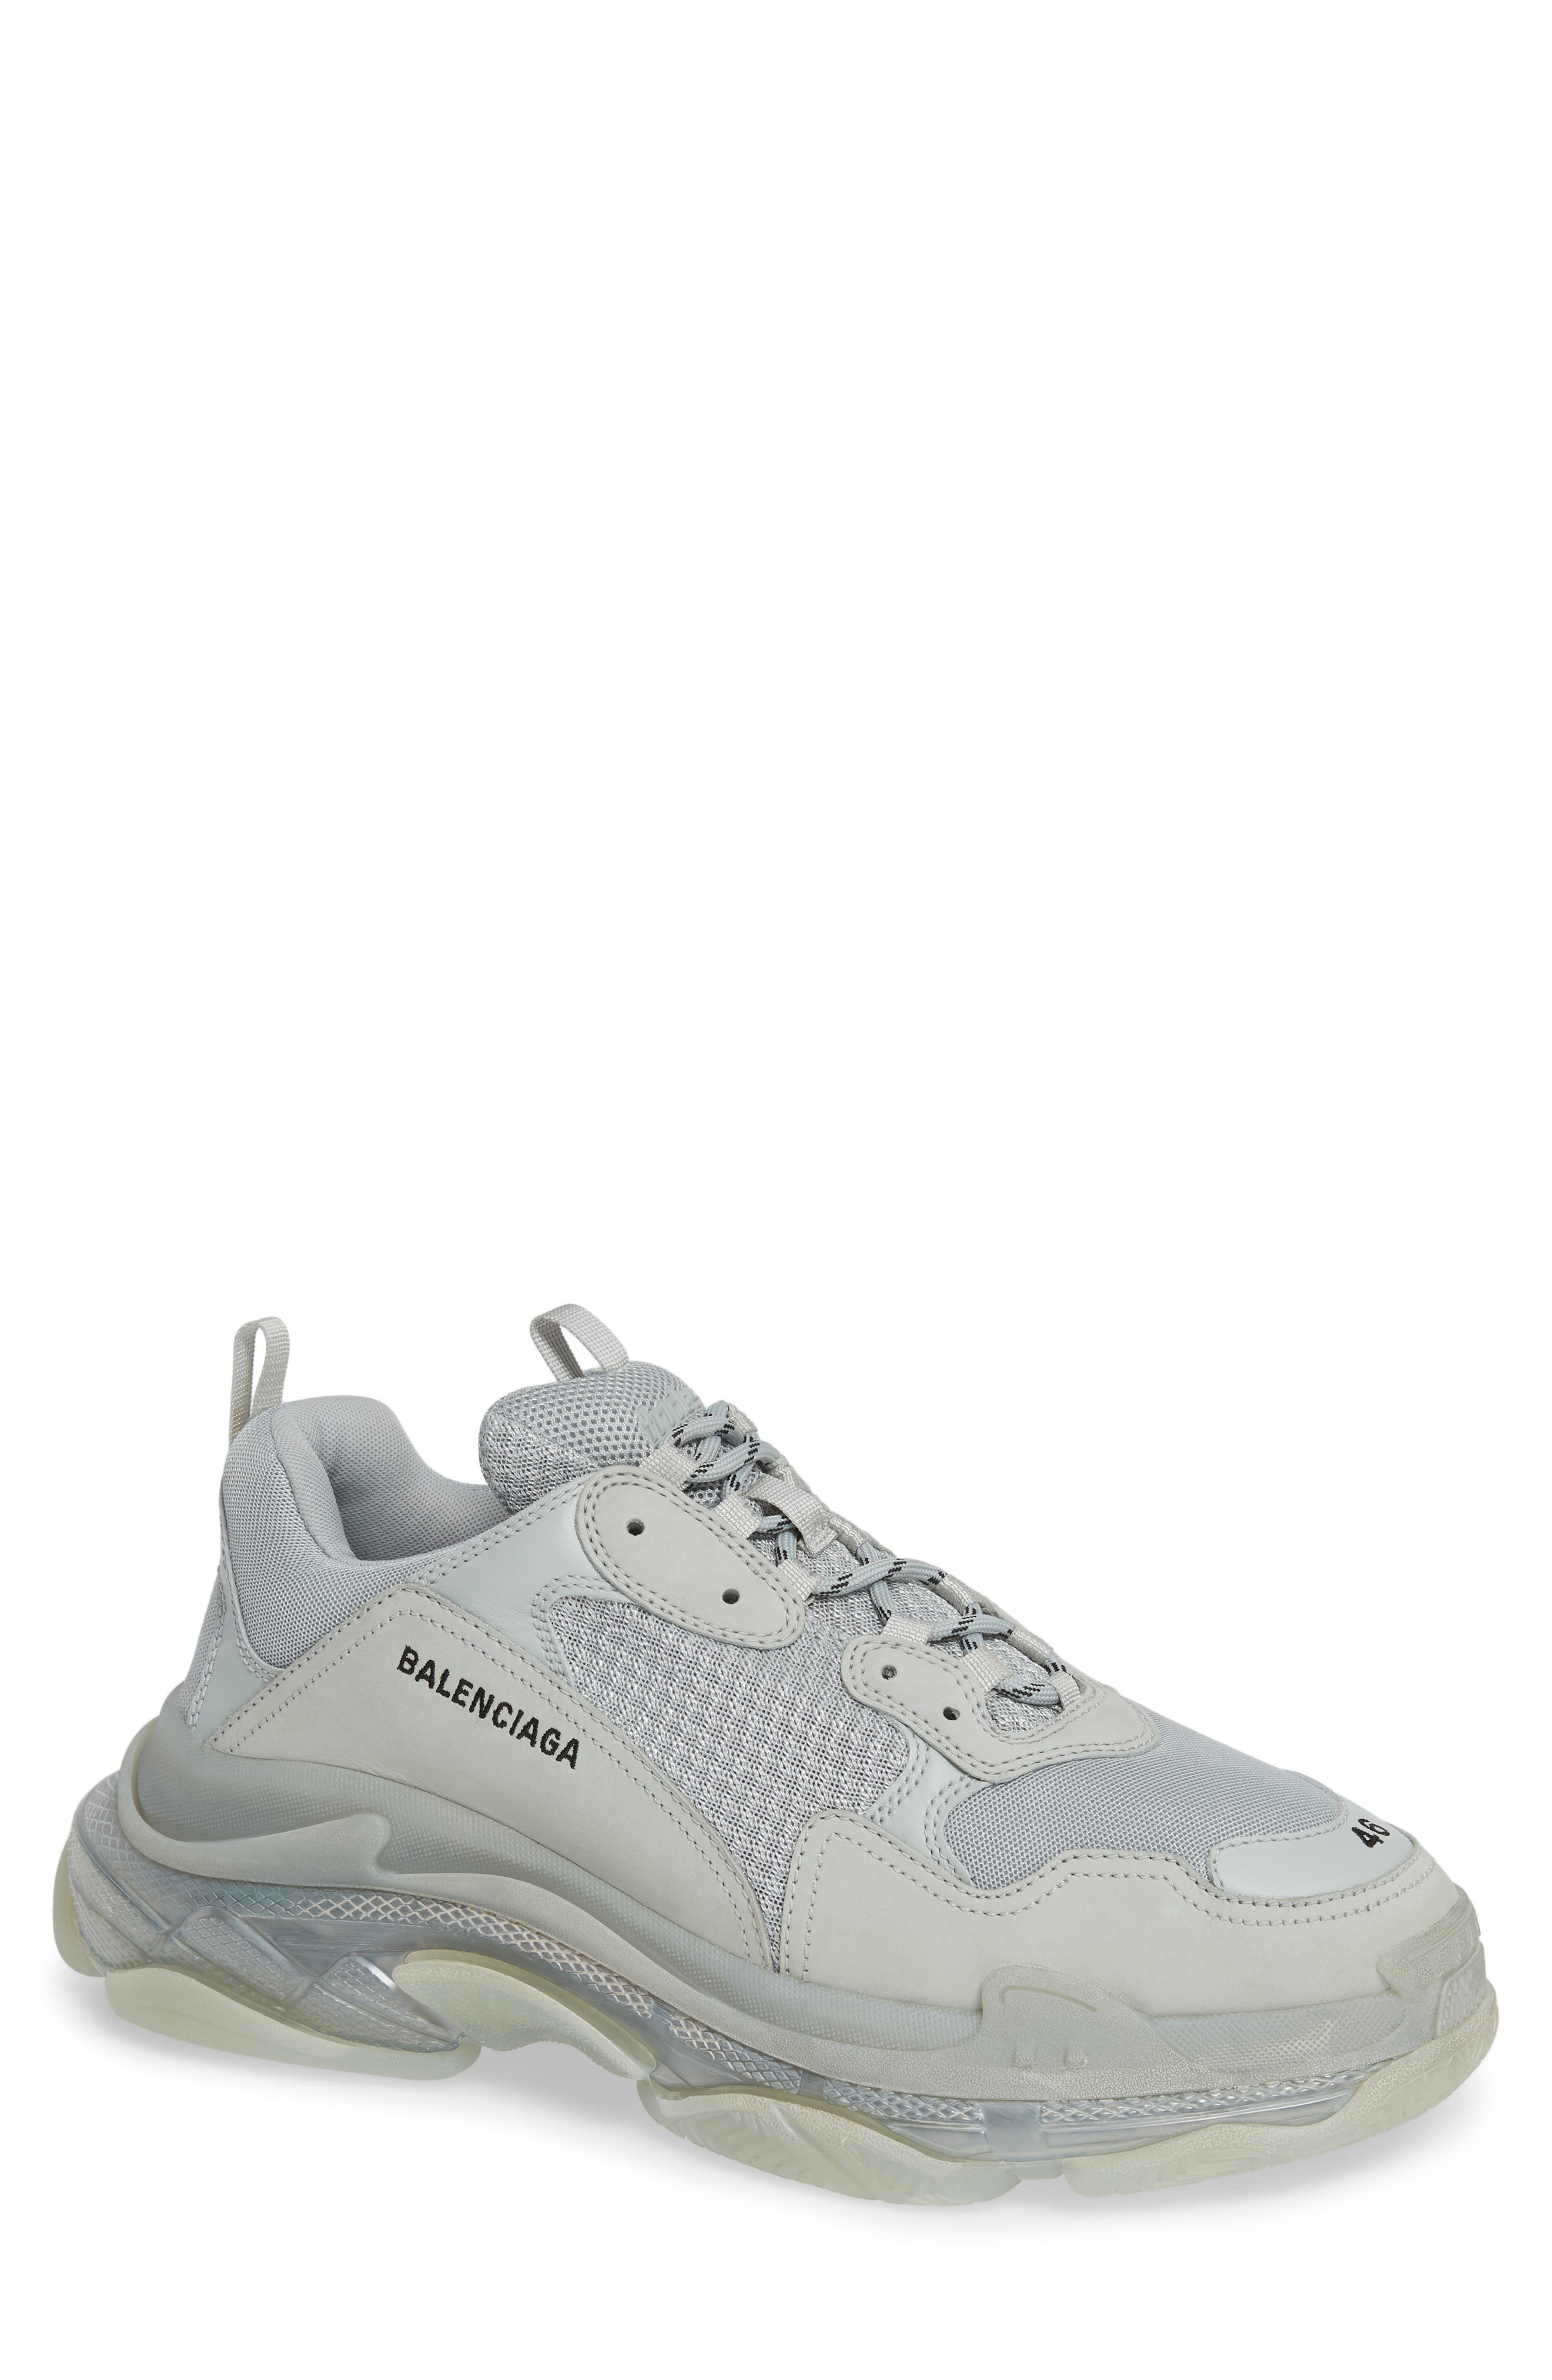 Balenciaga Ss18 New Triple S Sneakers in Noir Argent Grailed